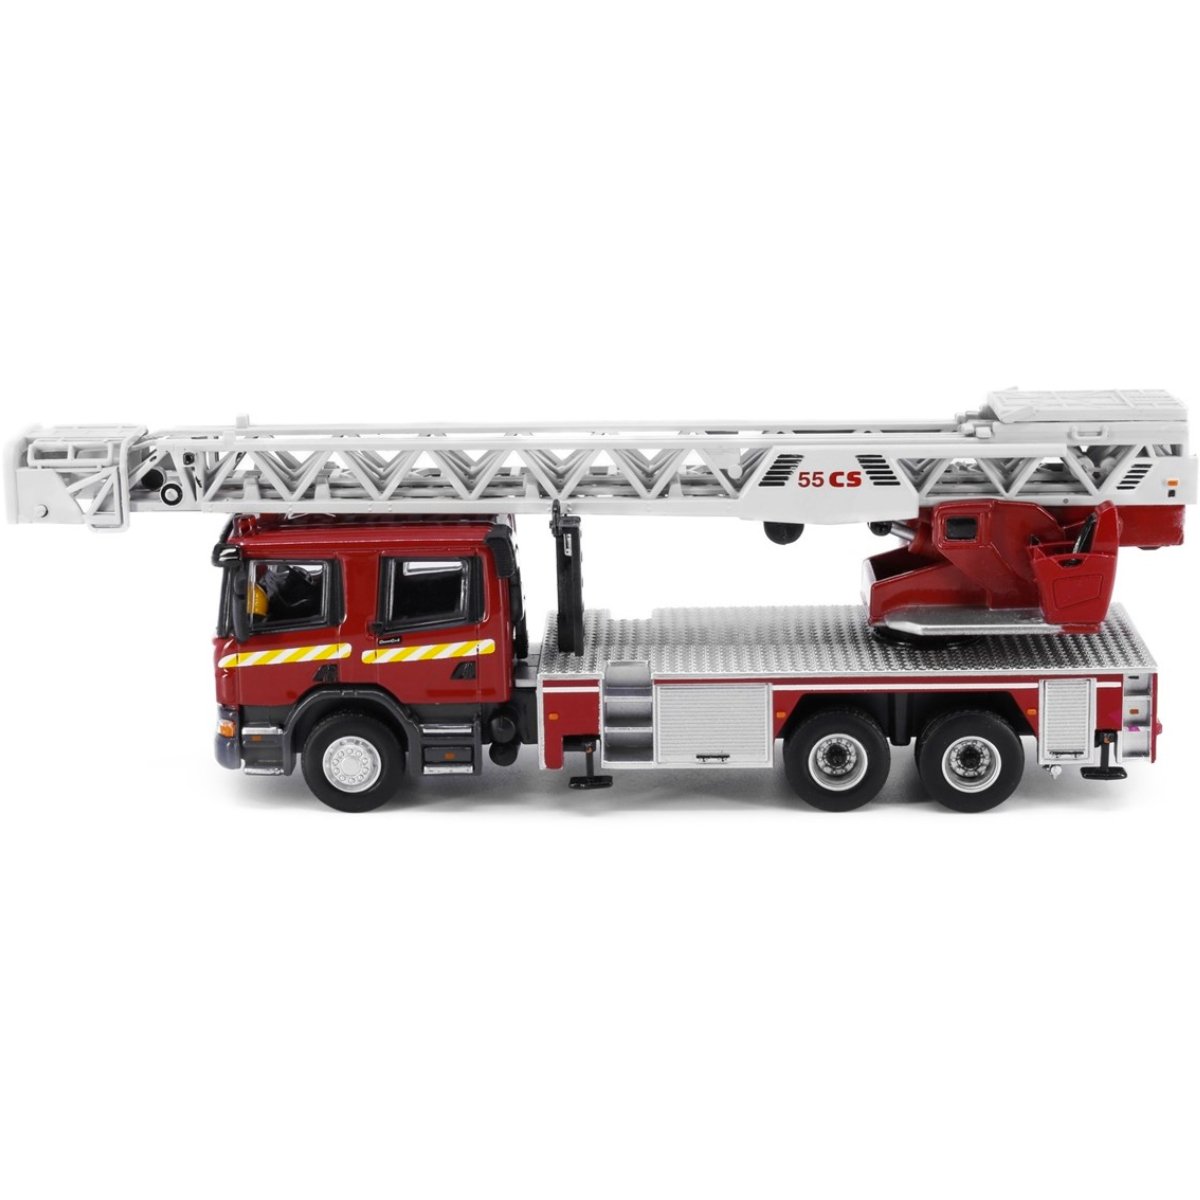 Tiny Models Scania Turntable Ladder 55M (1:76 Scale) - Phillips Hobbies